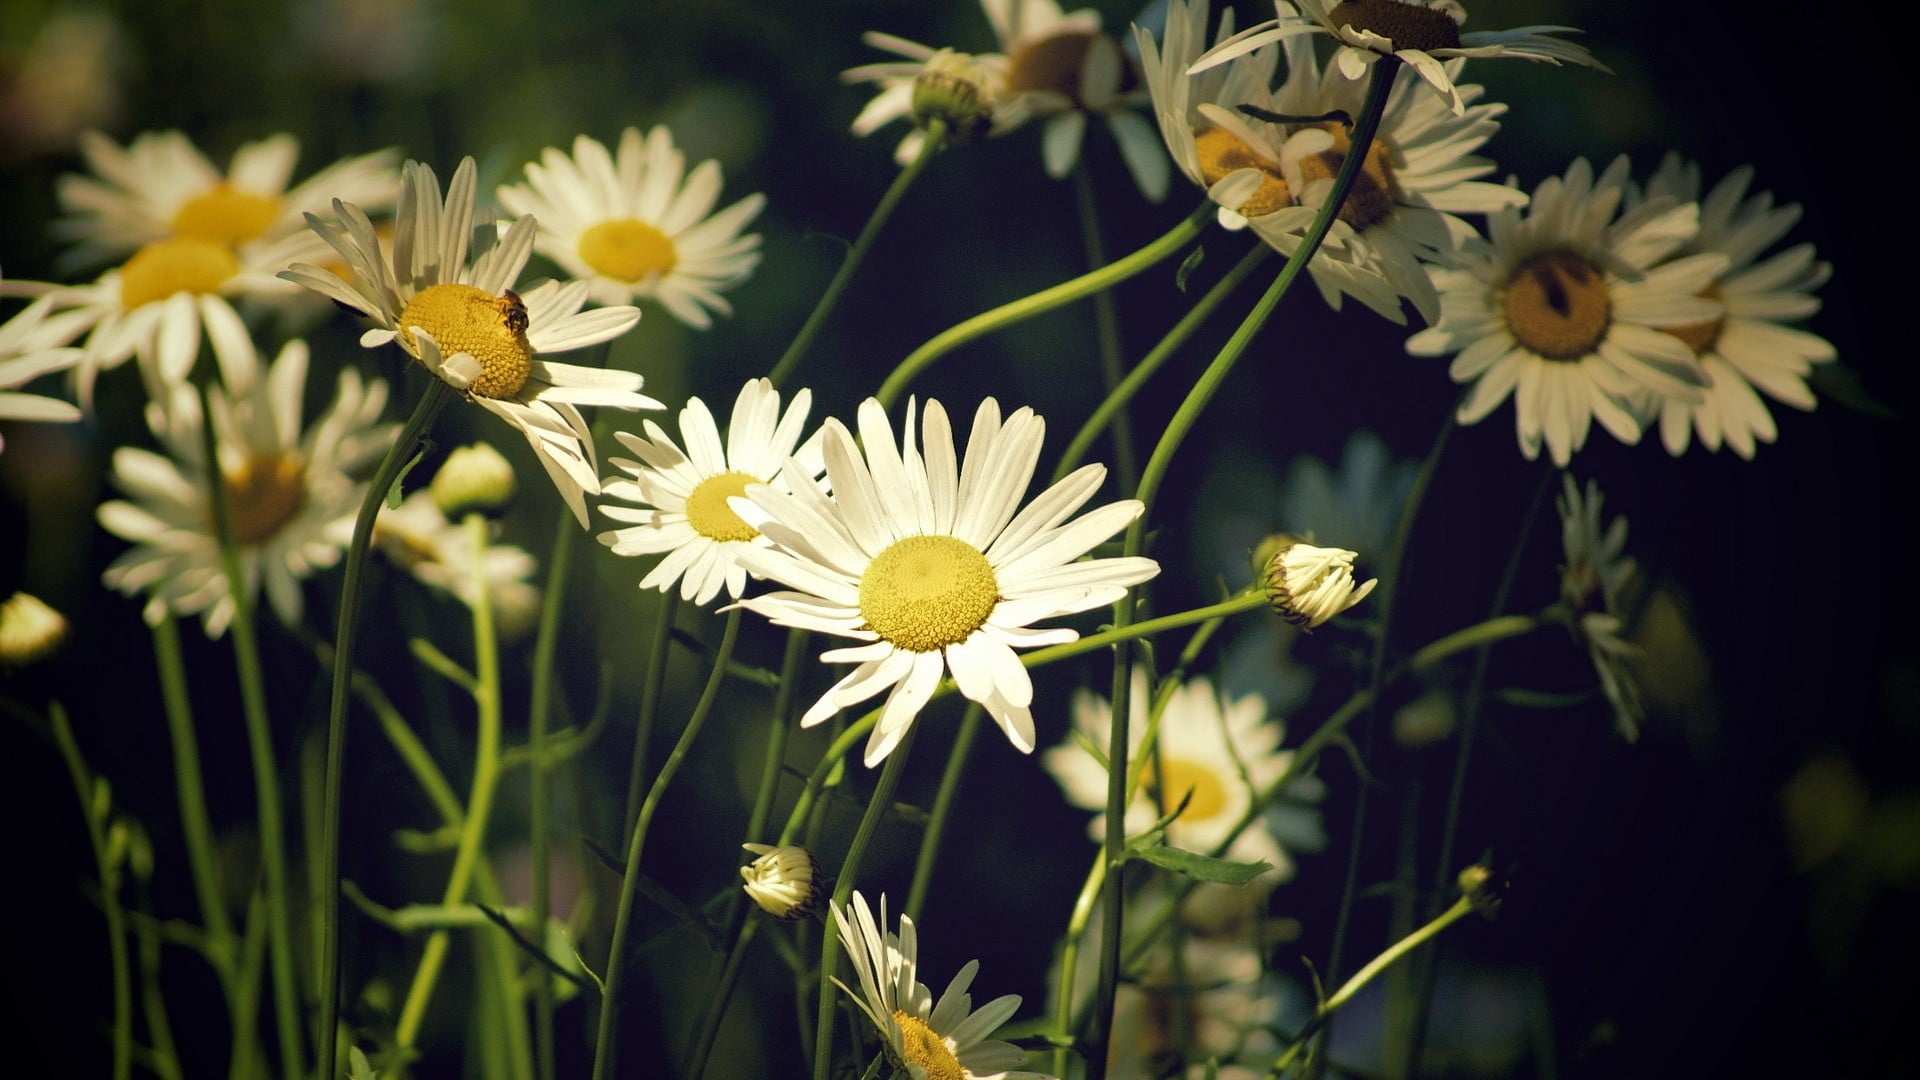 flowers, nature, daisies, matricaria, flowering plant, beauty in nature